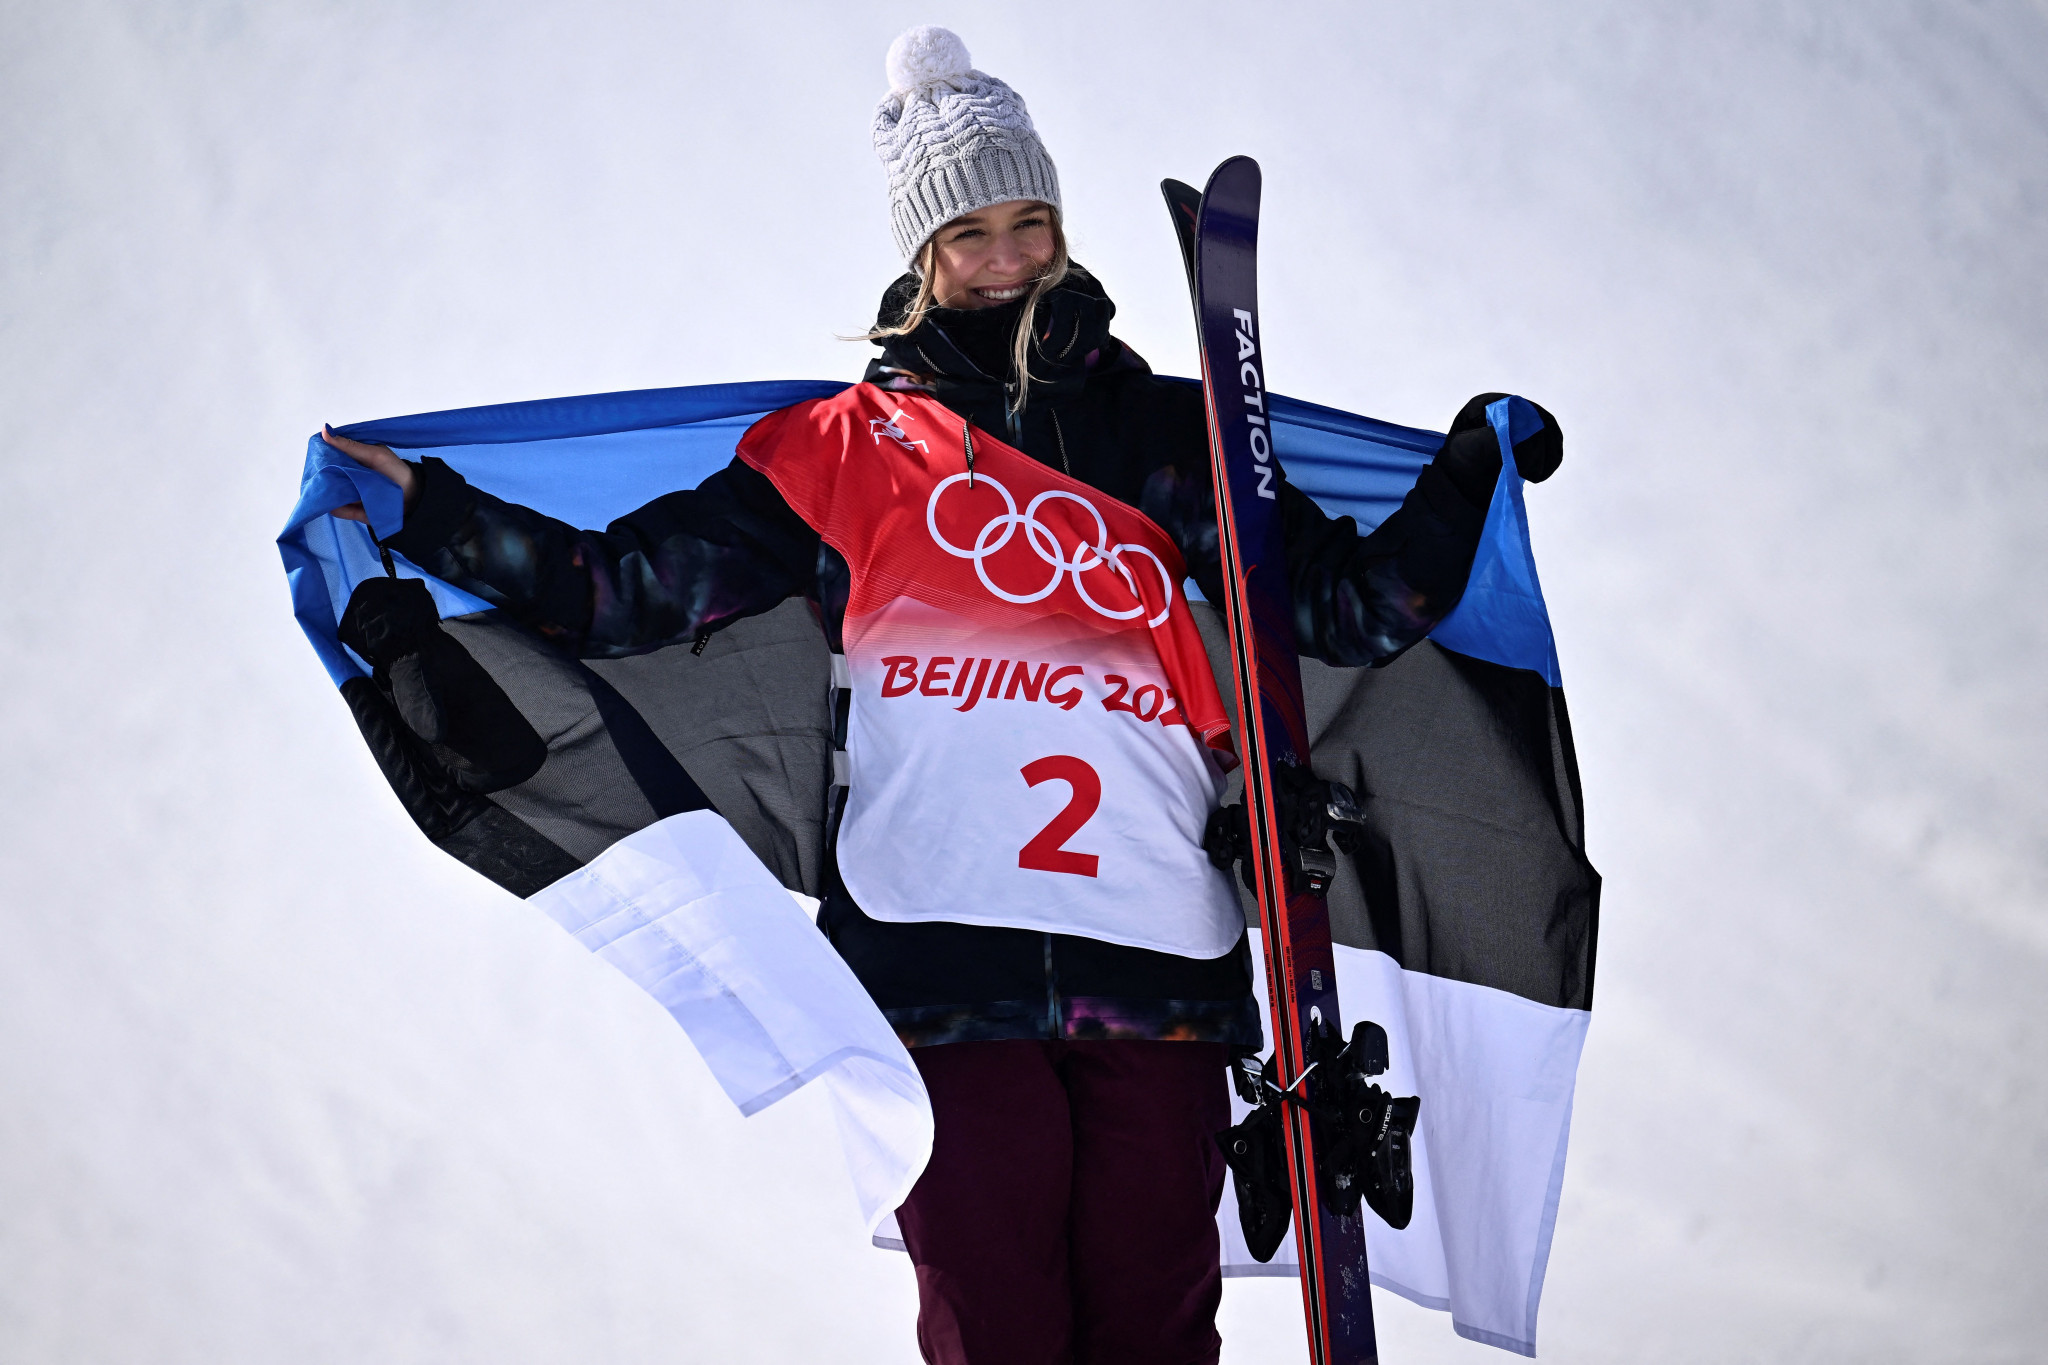 Kelly Sildaru won Estonia's first medal at the Olympics in 12 years when she finished third ©Getty Images